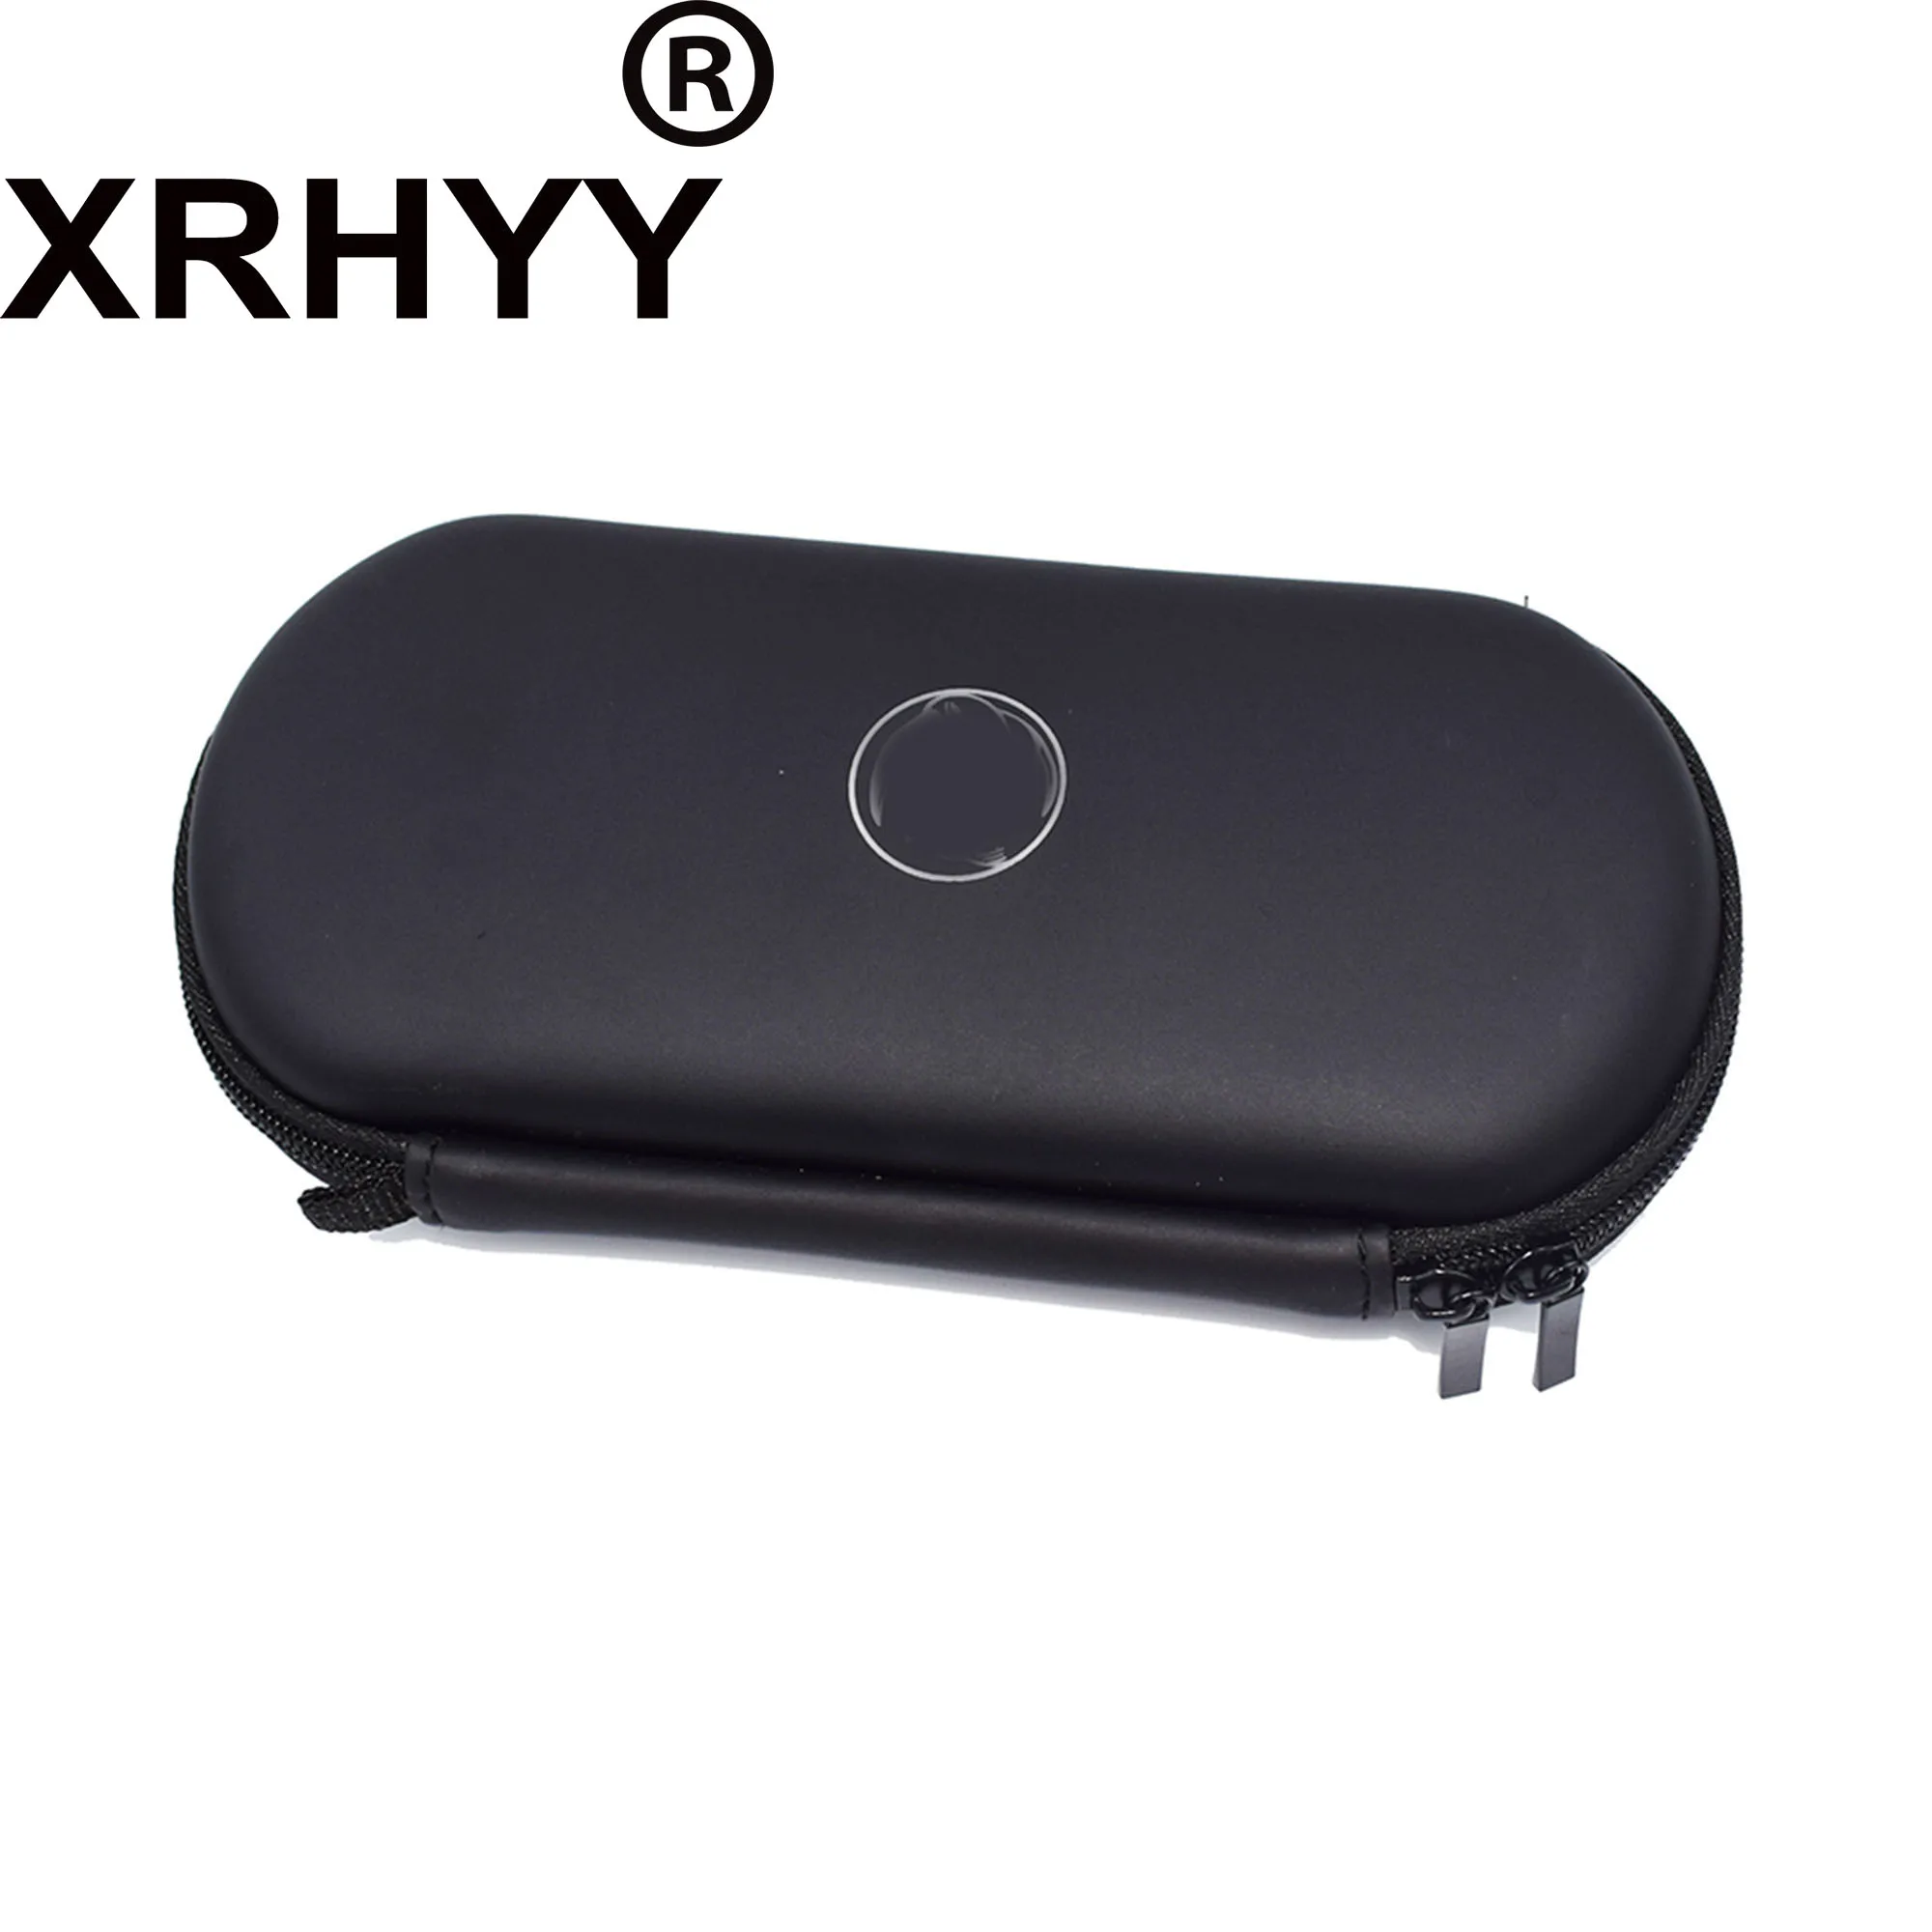 

XRHYY EVA Hard Travel Carry Cover Case Carry Bag Protector Compatible For PSP1000/2000/3000 Game Machine Storage PSP Hard Bag